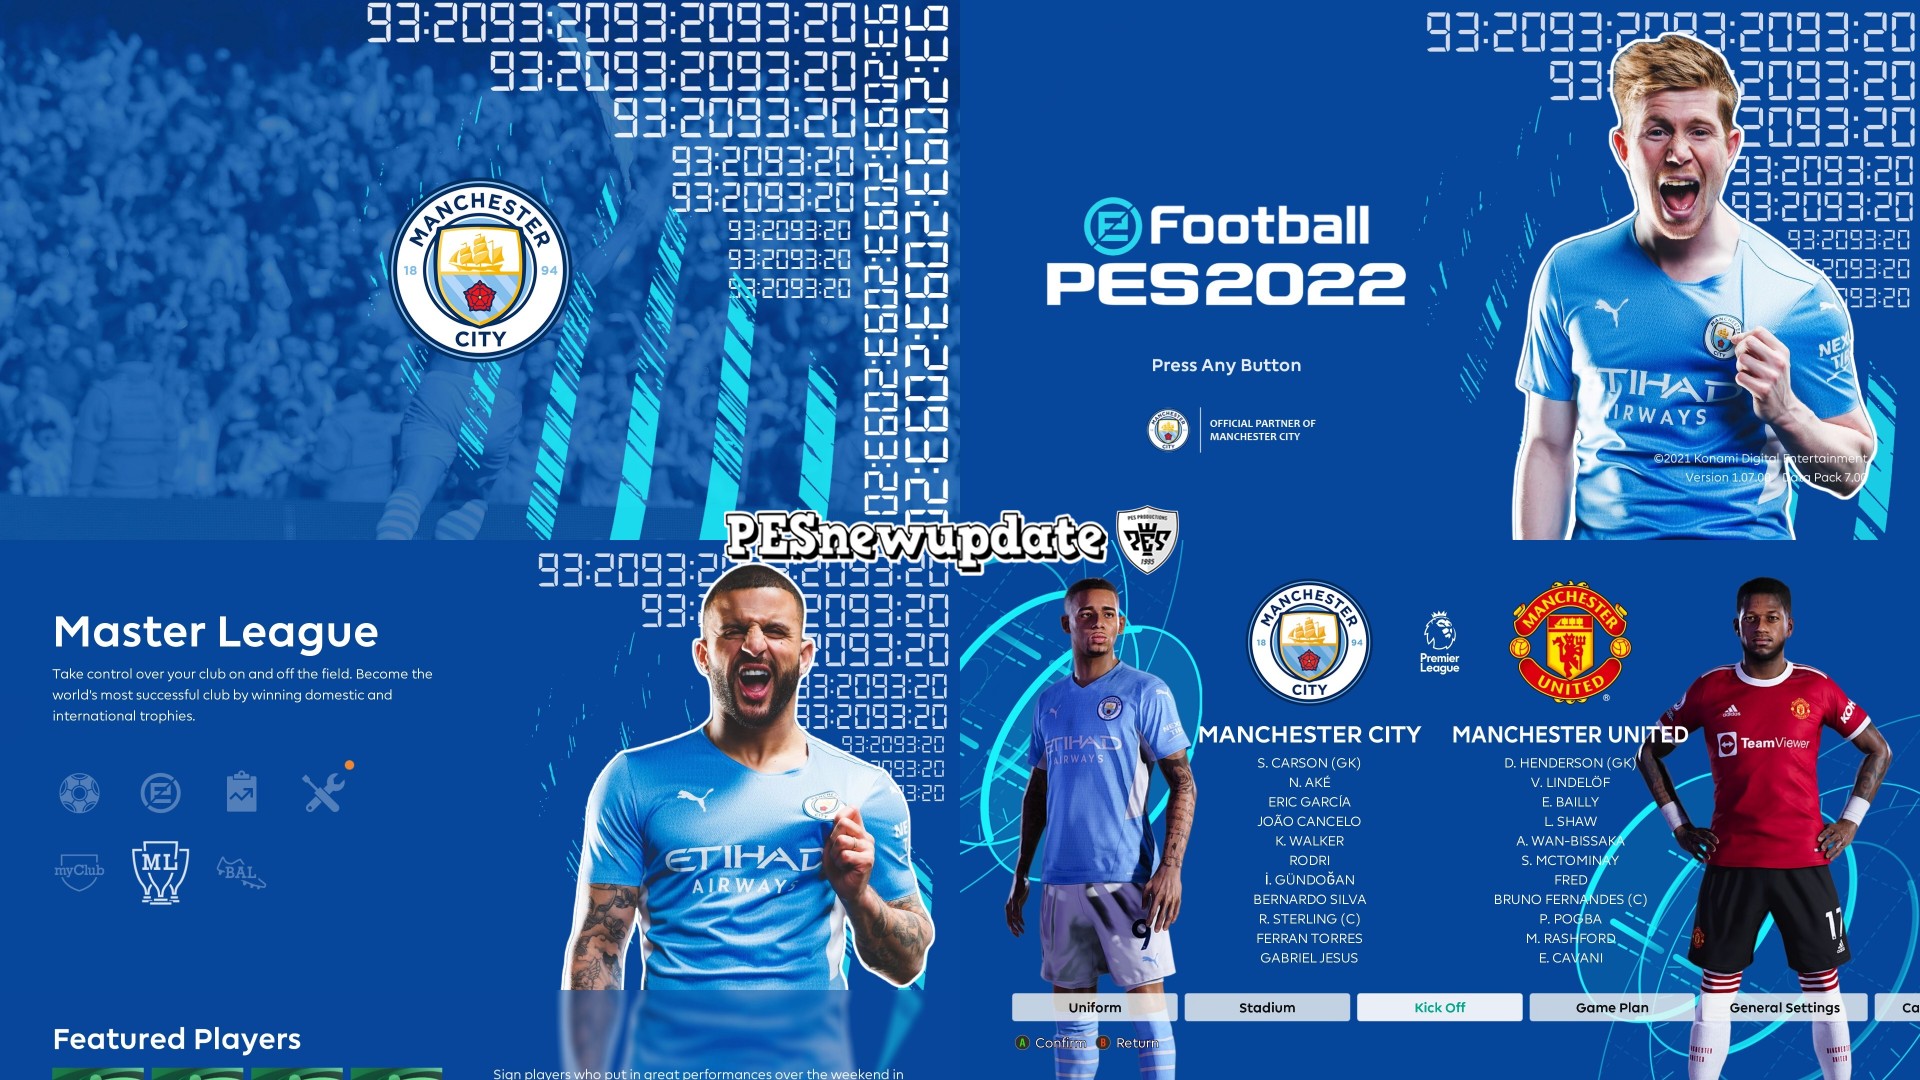 PES 2021 Menu Mod Manchester City 93:20 2021 2022 By PESNewupdate PESNewupdate.com. Free Download Latest Pro Evolution Soccer Patch & Updates